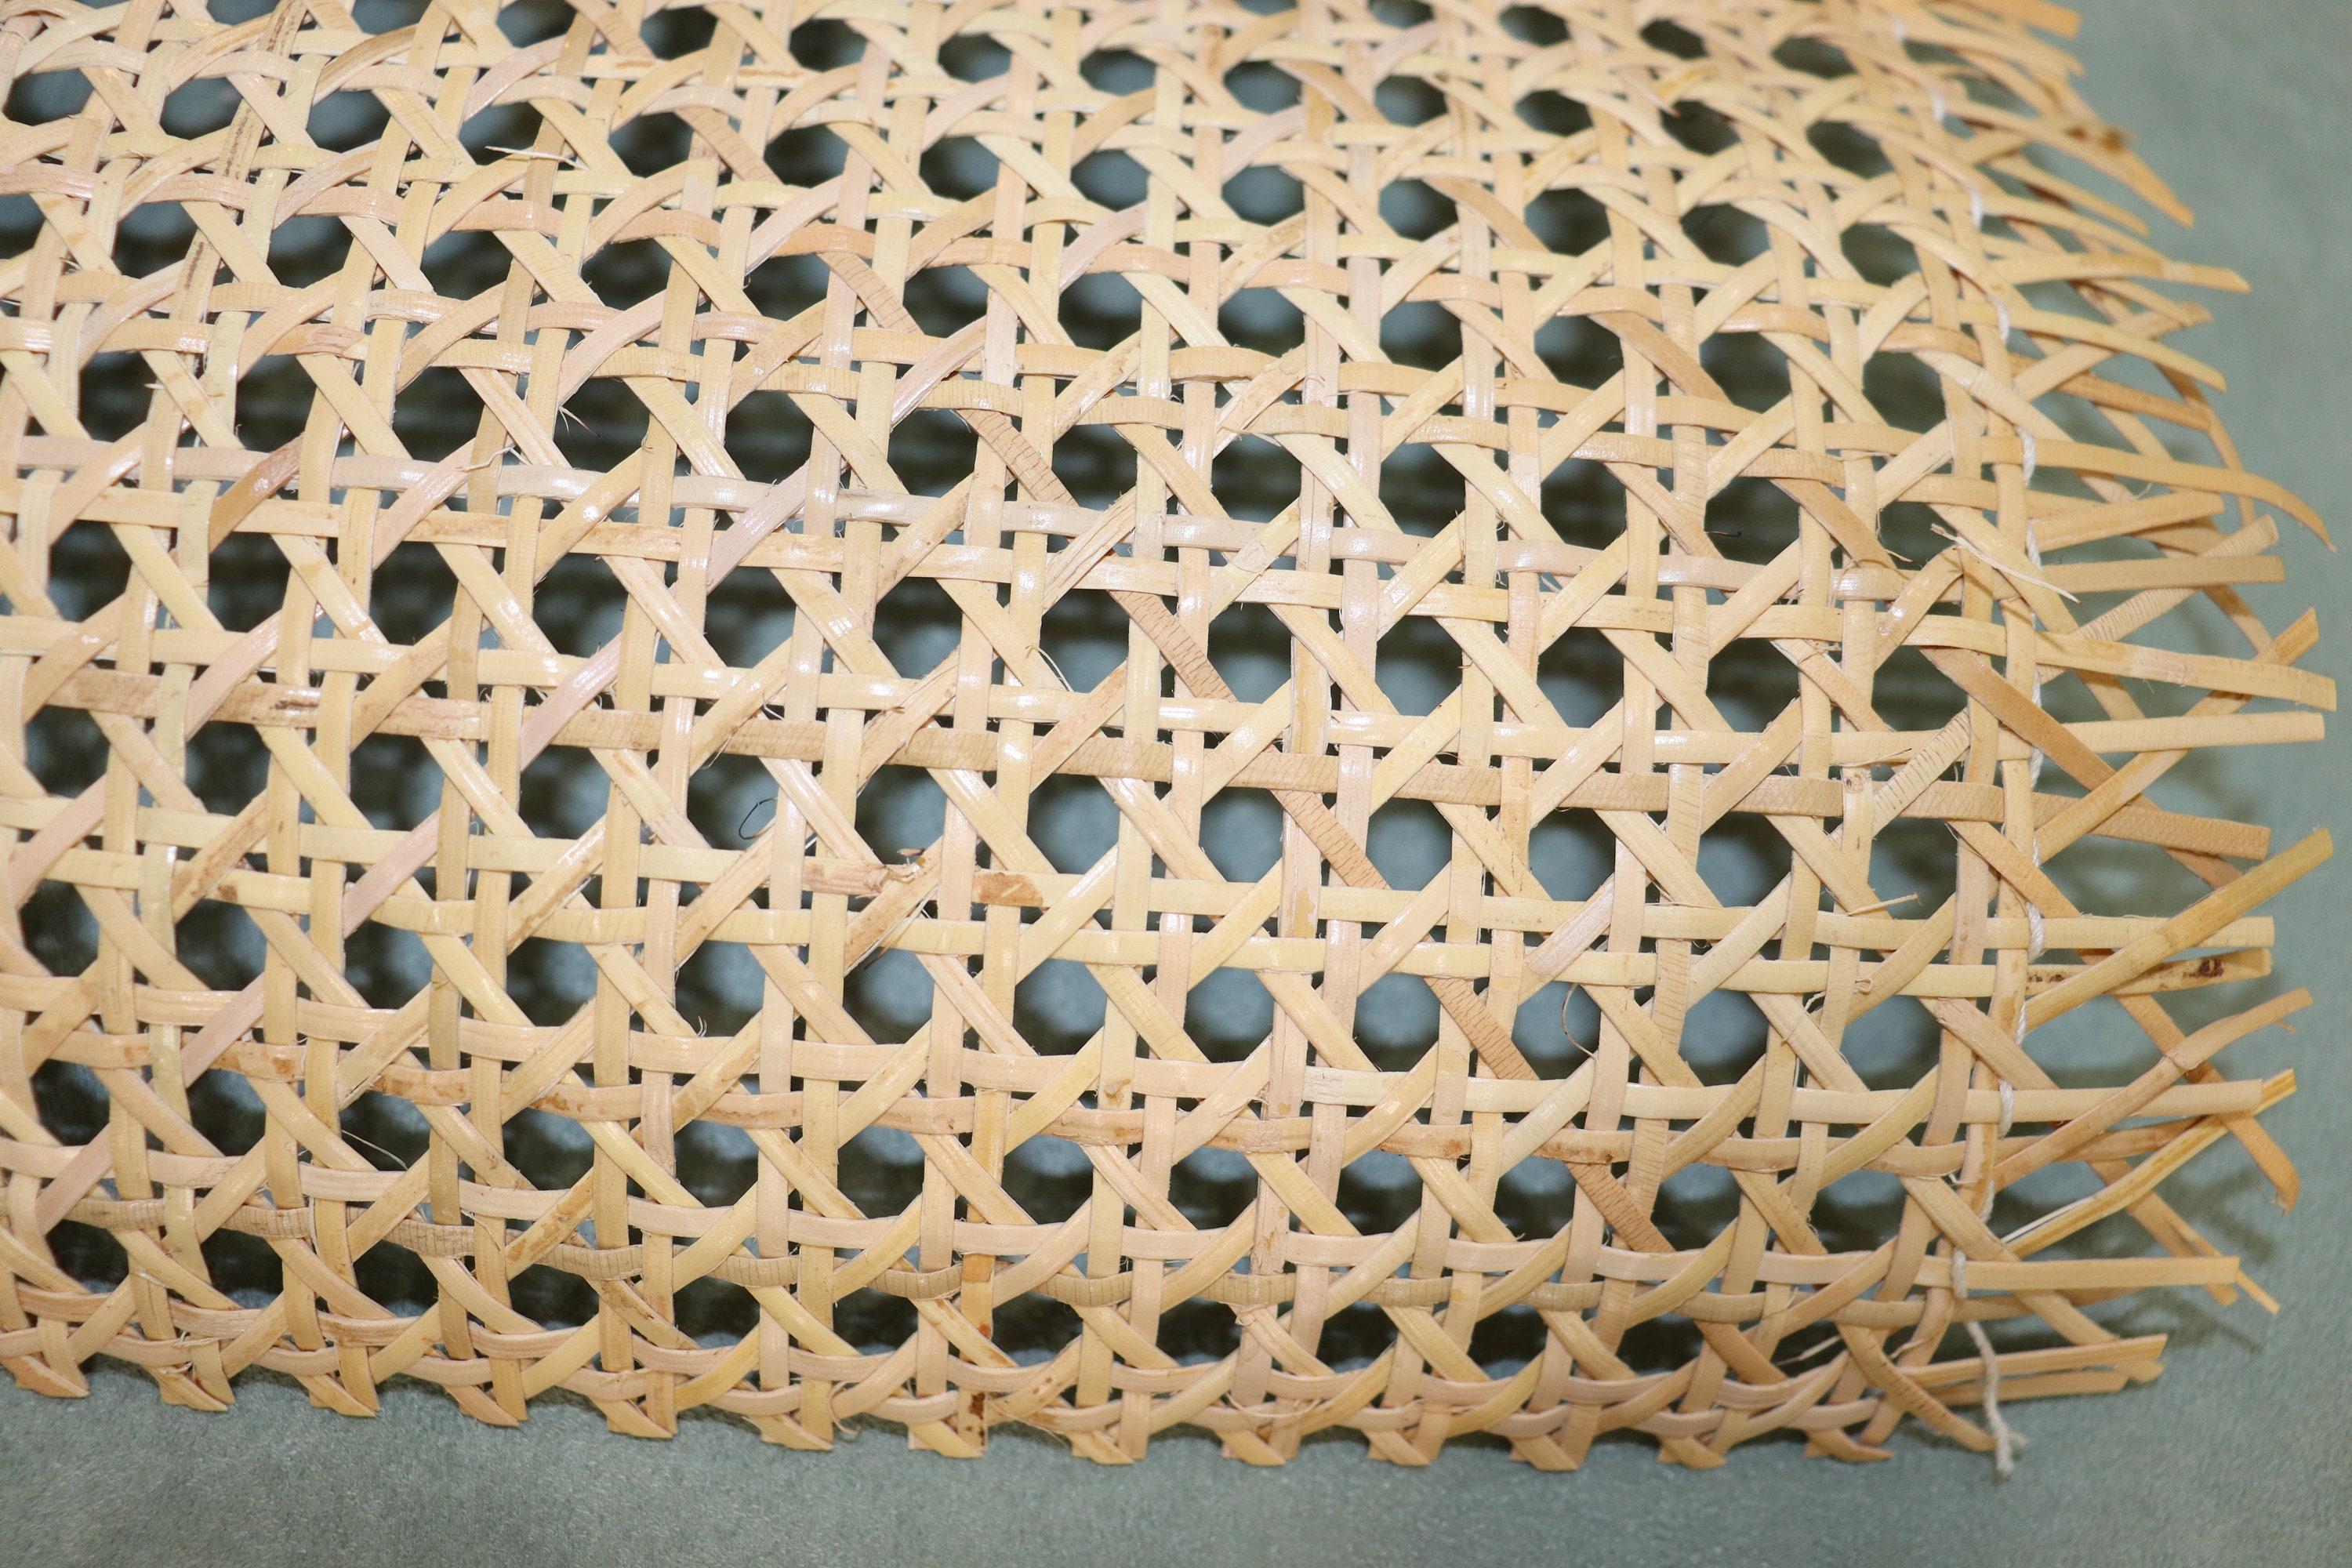 Discount Trends 18” Wide Natural Rattan Webbing Roll for Caning Projects Pre - Woven Open Mesh for Caning Chair, Craft Cabinet and Furniture - Natural Rattan